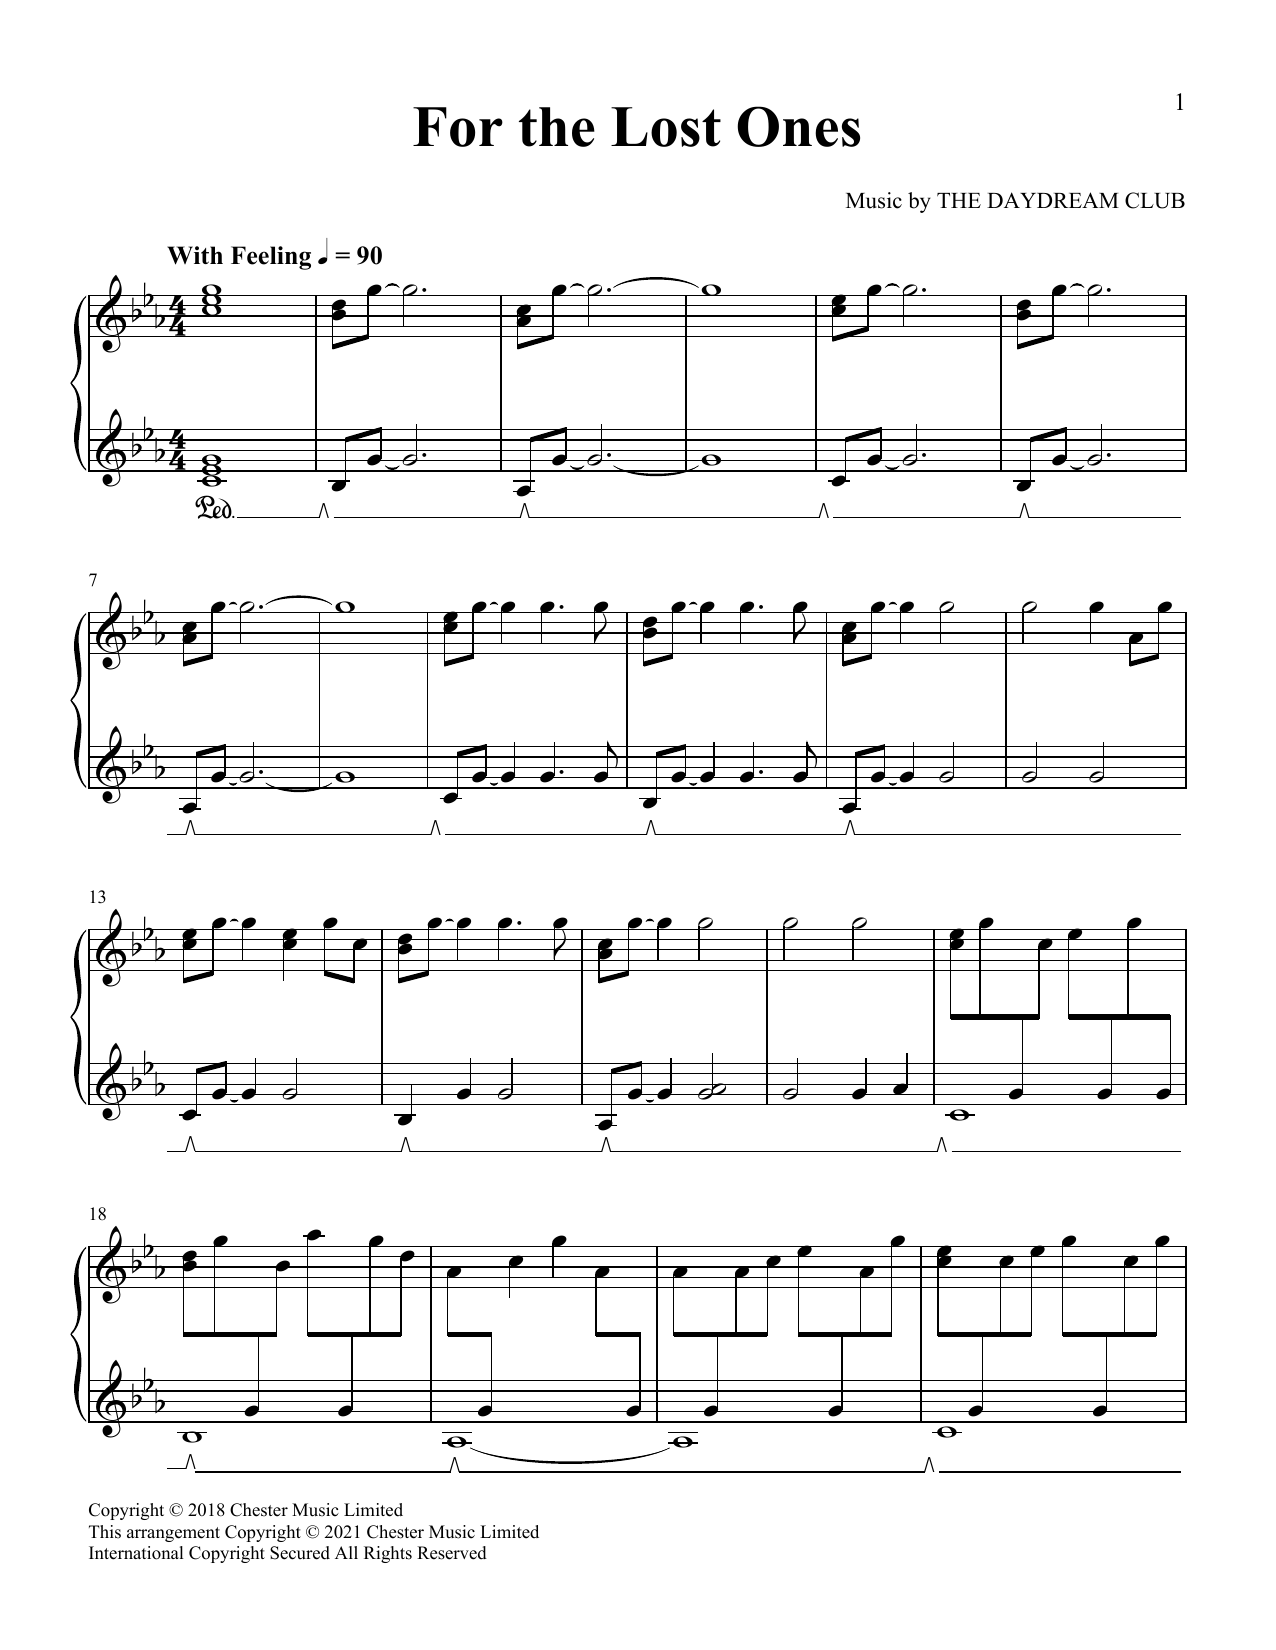 Download The Daydream Club For The Lost Ones Sheet Music